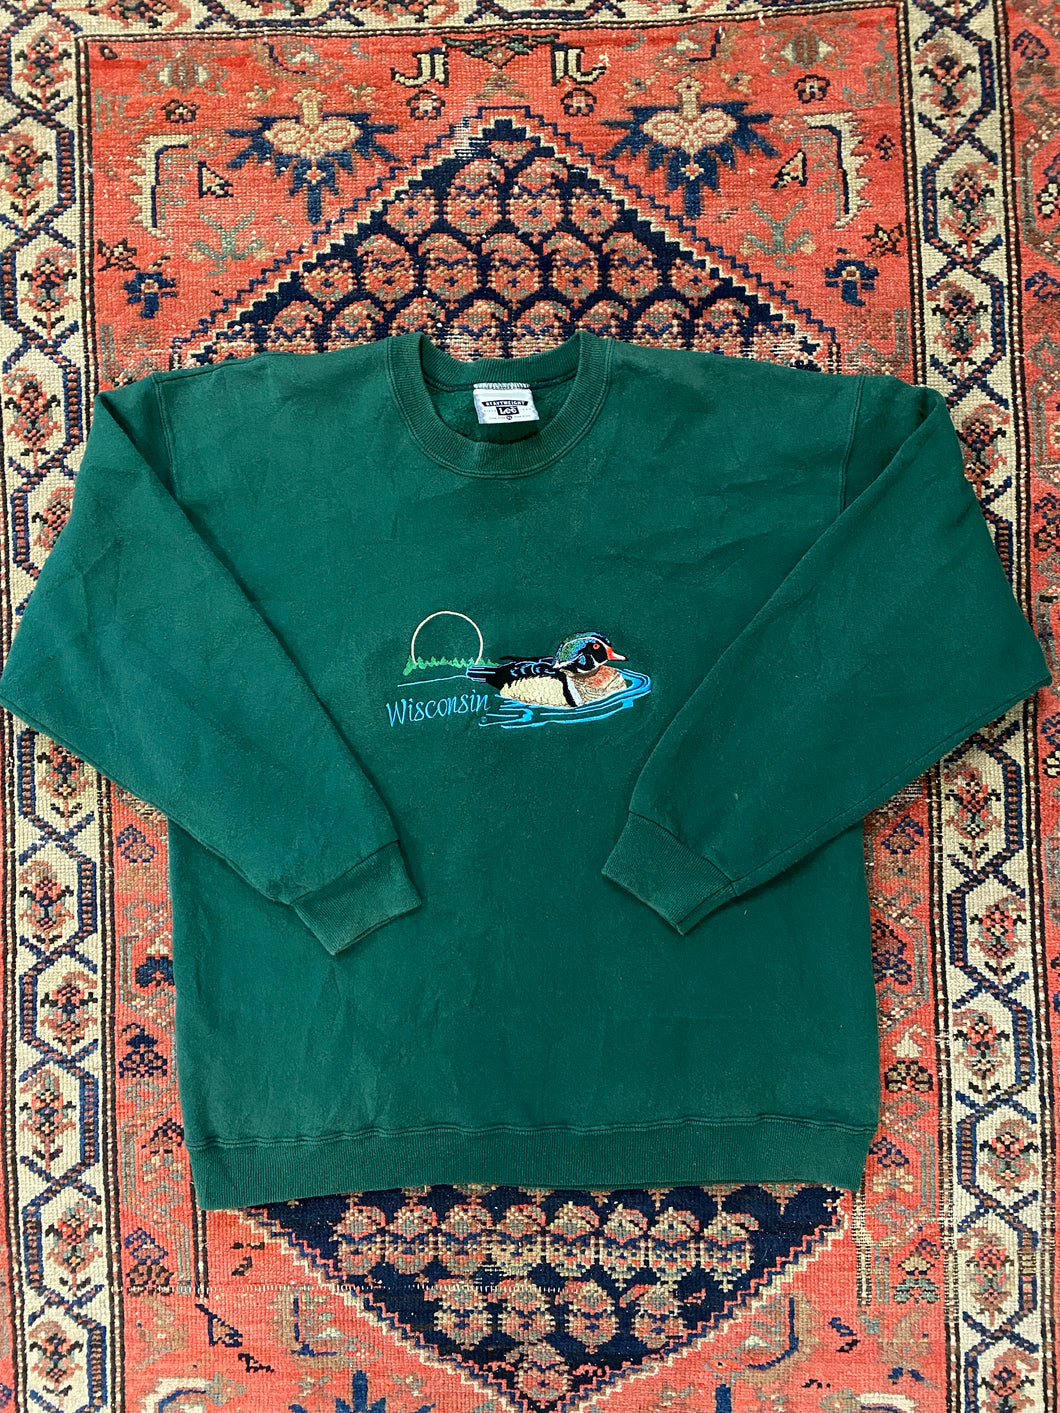 90s Embroidered Wisconsin Crewneck - L